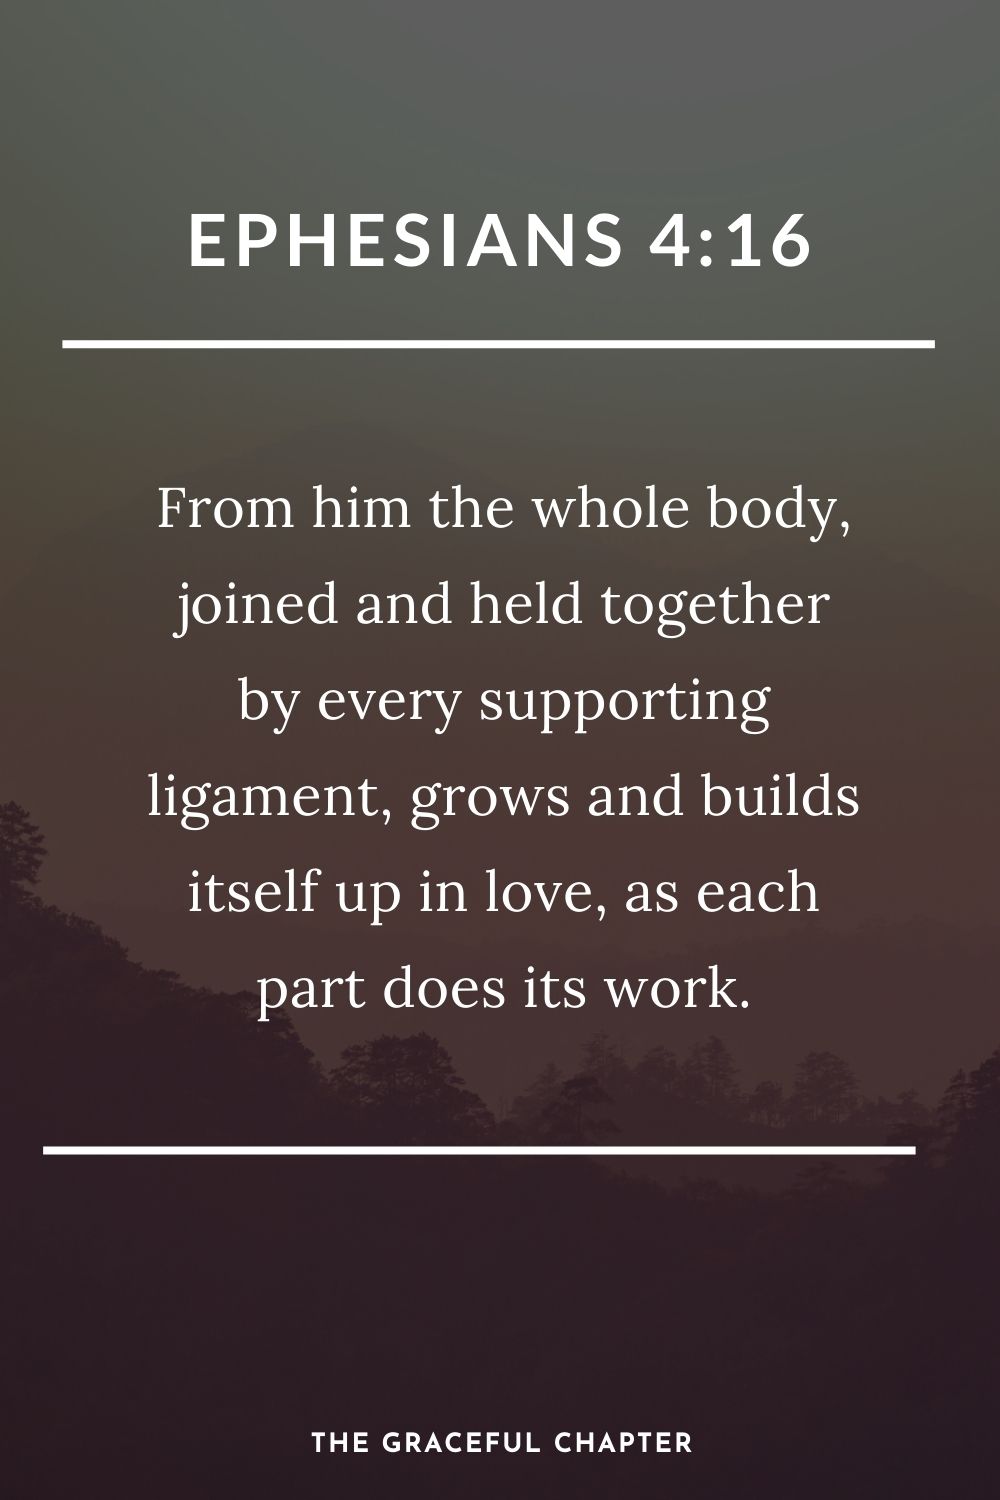 From him the whole body, joined and held together by every supporting ligament, grows and builds itself up in love, as each part does its work. Ephesians 4:16